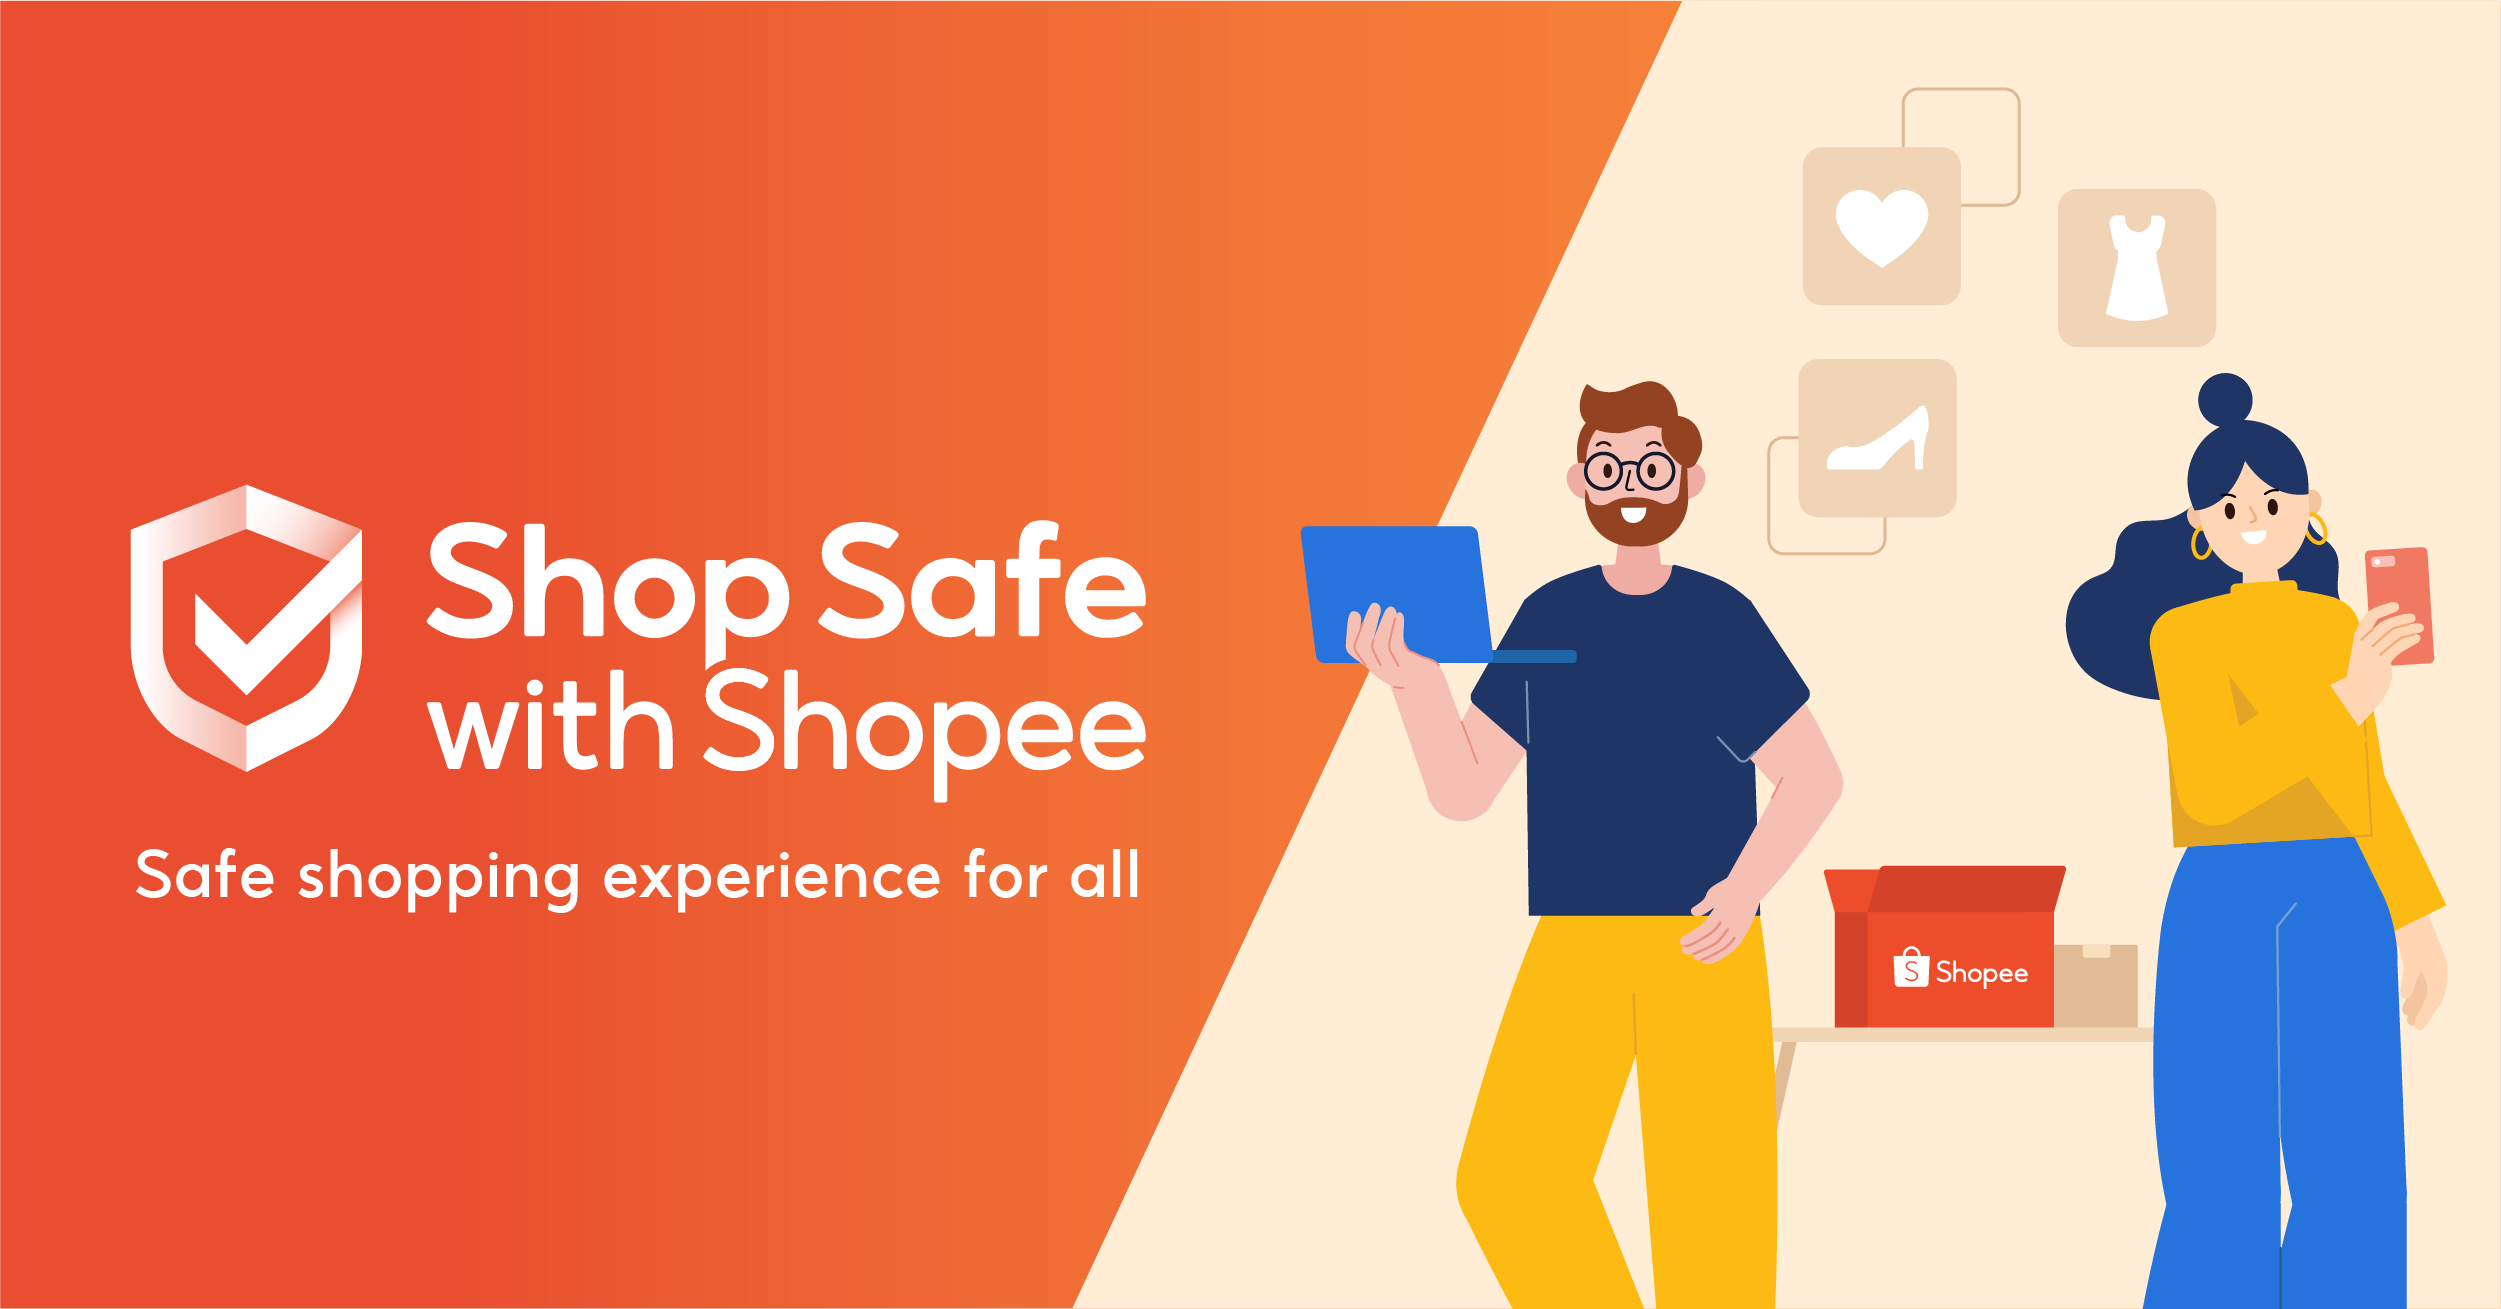 Shop Safe with Shopee